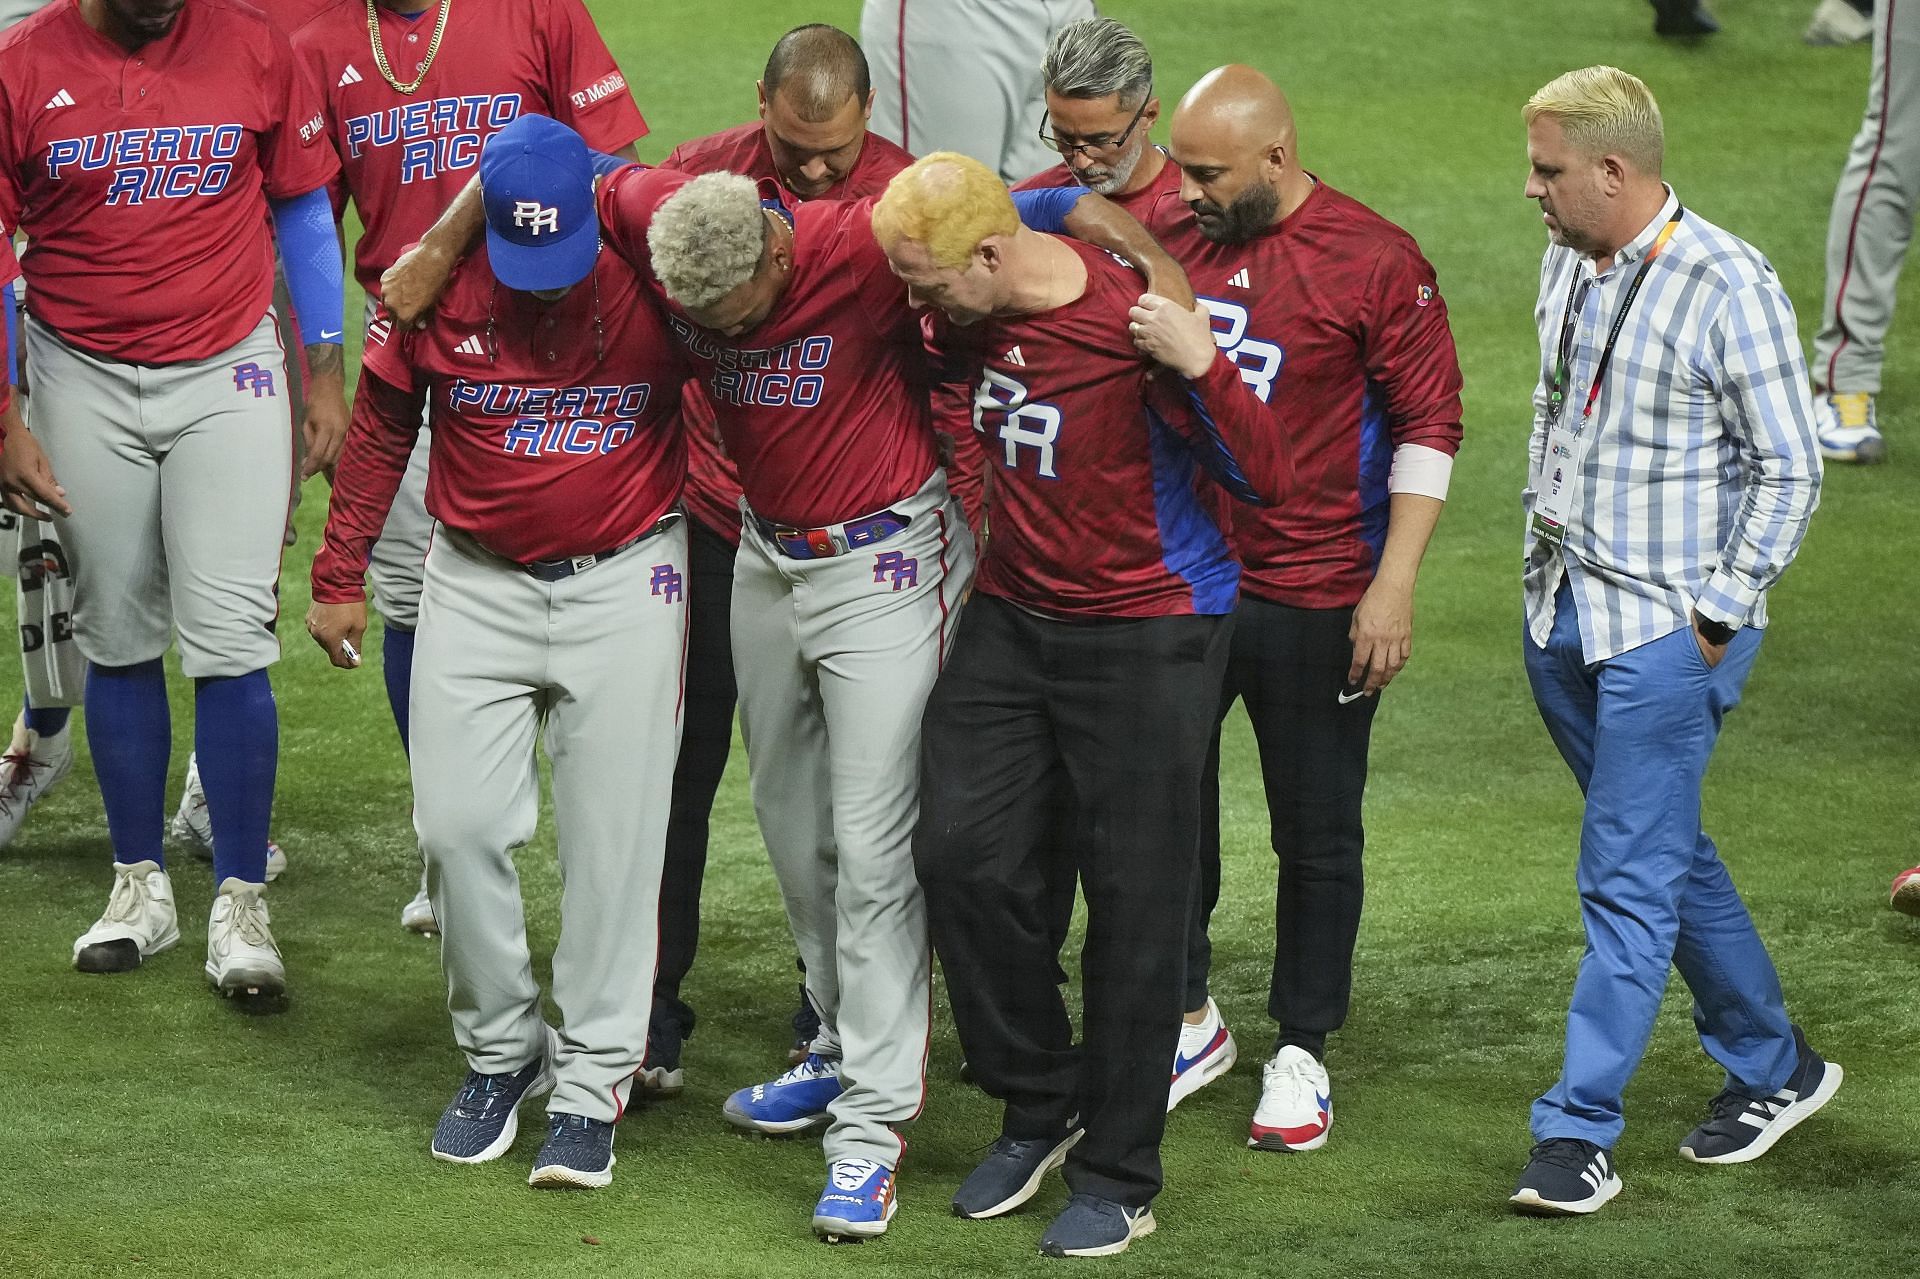 Edwin Diaz was helped off the field by teammates after an injury against the Dominican Republic.